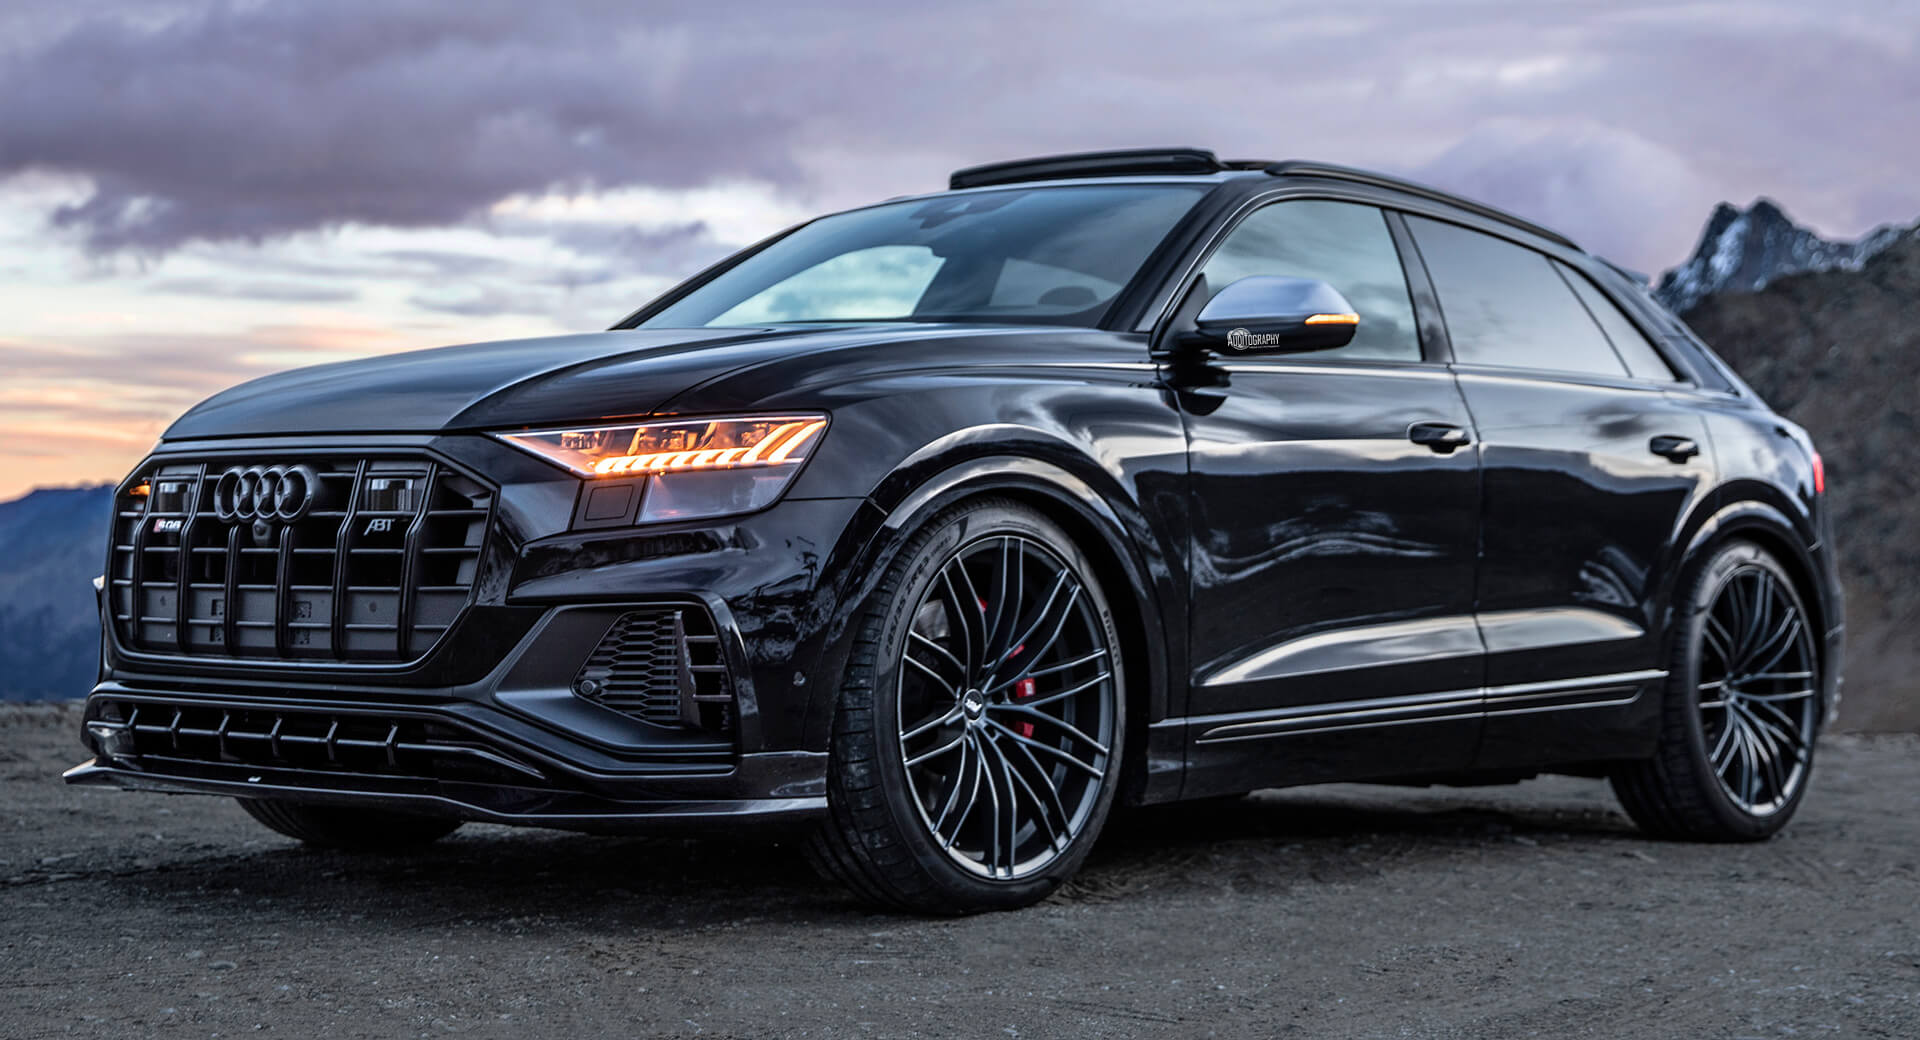 Sinister Looking ABT Audi SQ8 Is Out For Super SUV Blood With 641 Horses  Under Its Hood | Carscoops